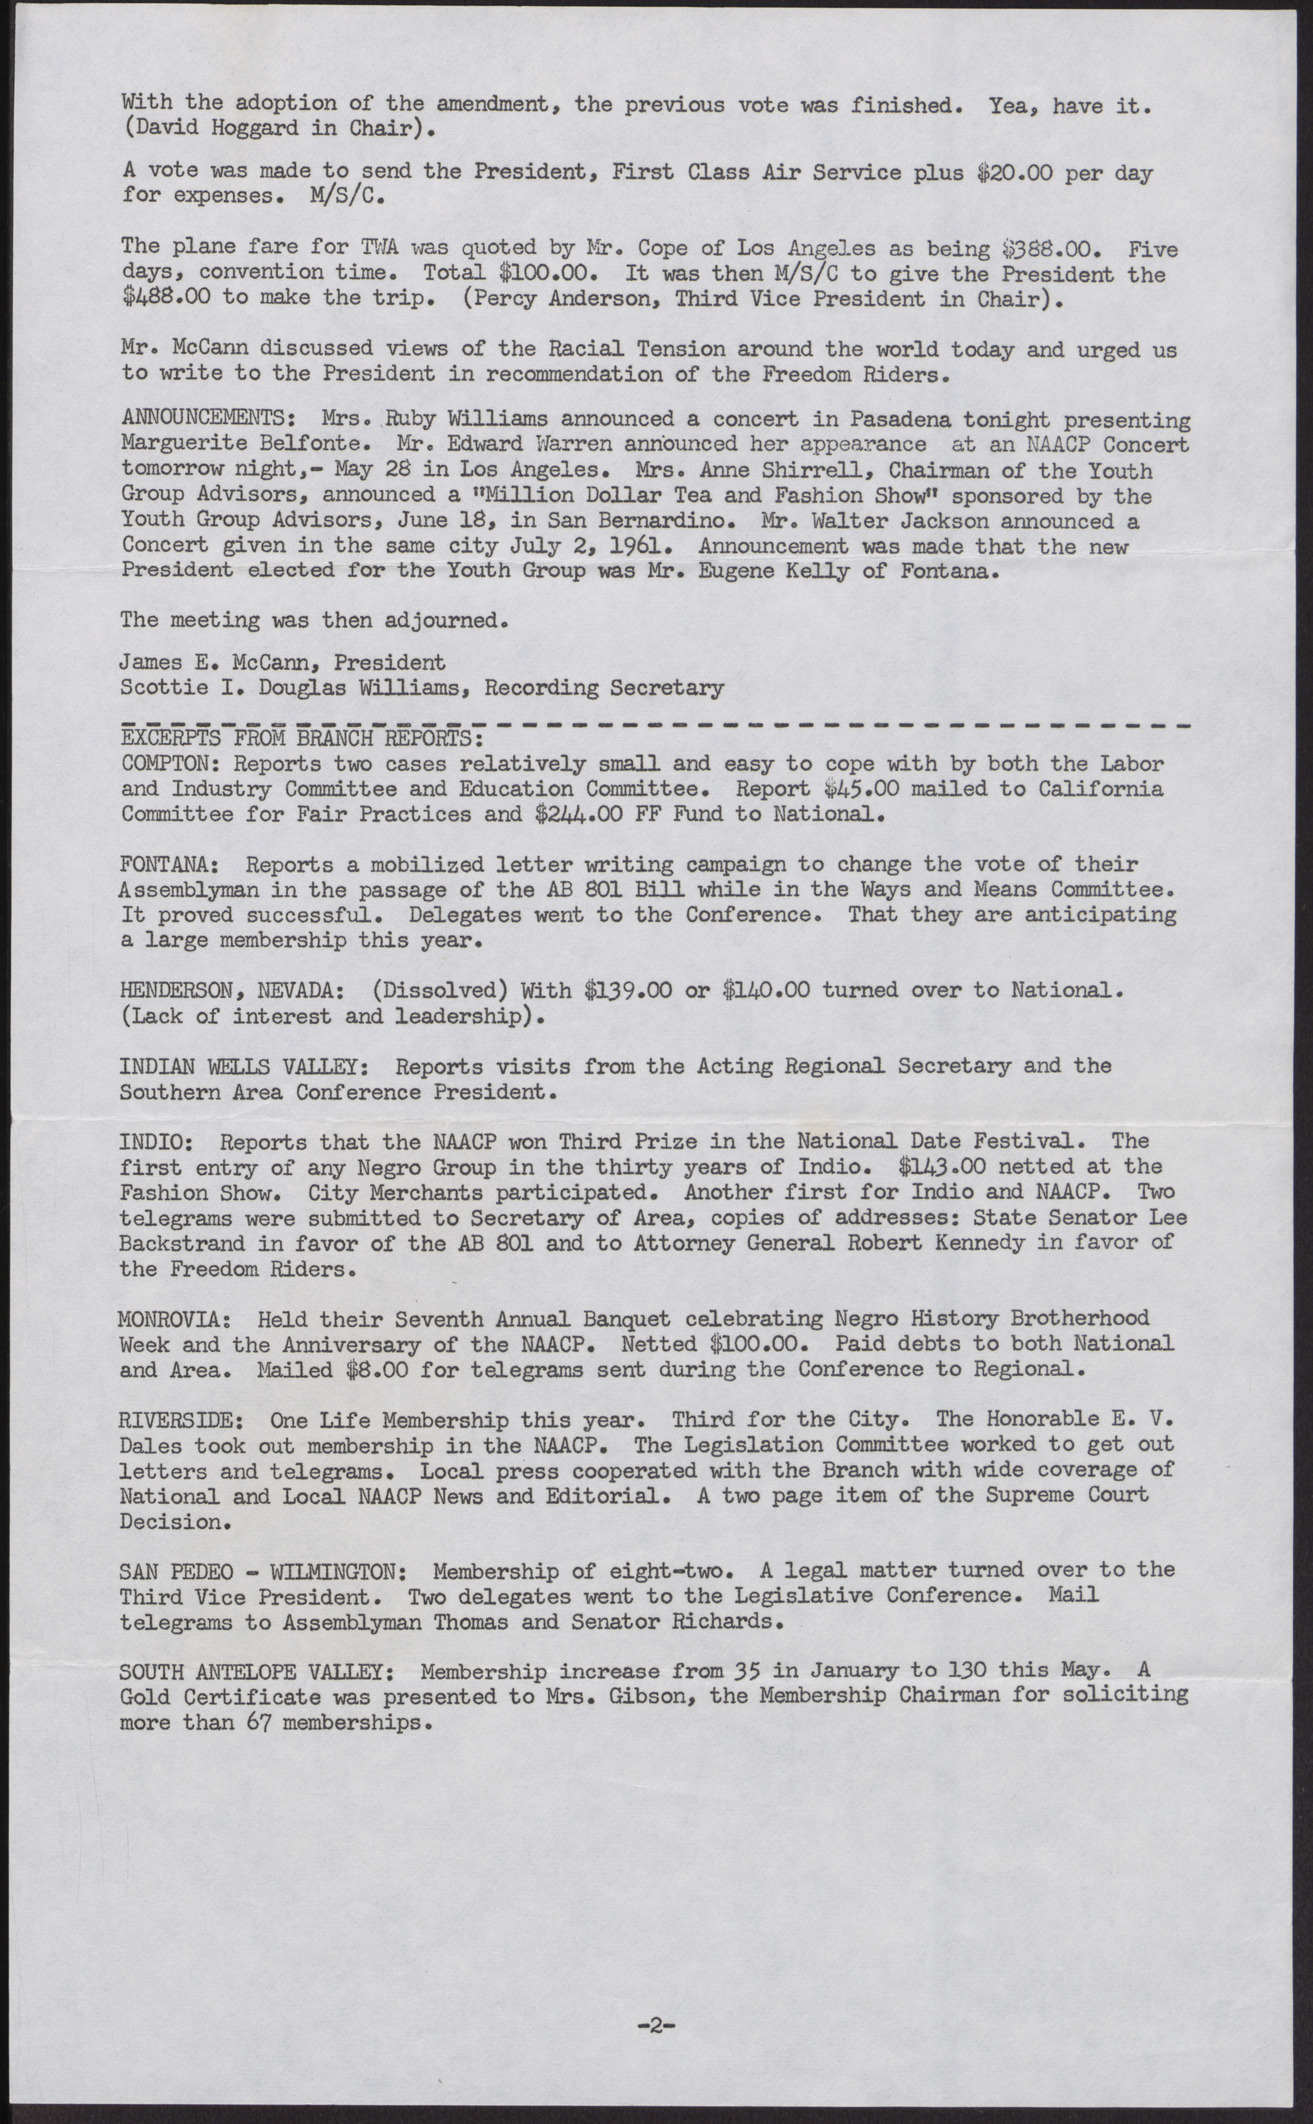 Minutes of the NAACP Second Quarterly Area Meeting of the Southern Area Conference (2 pages), May 27, 1961, page 2